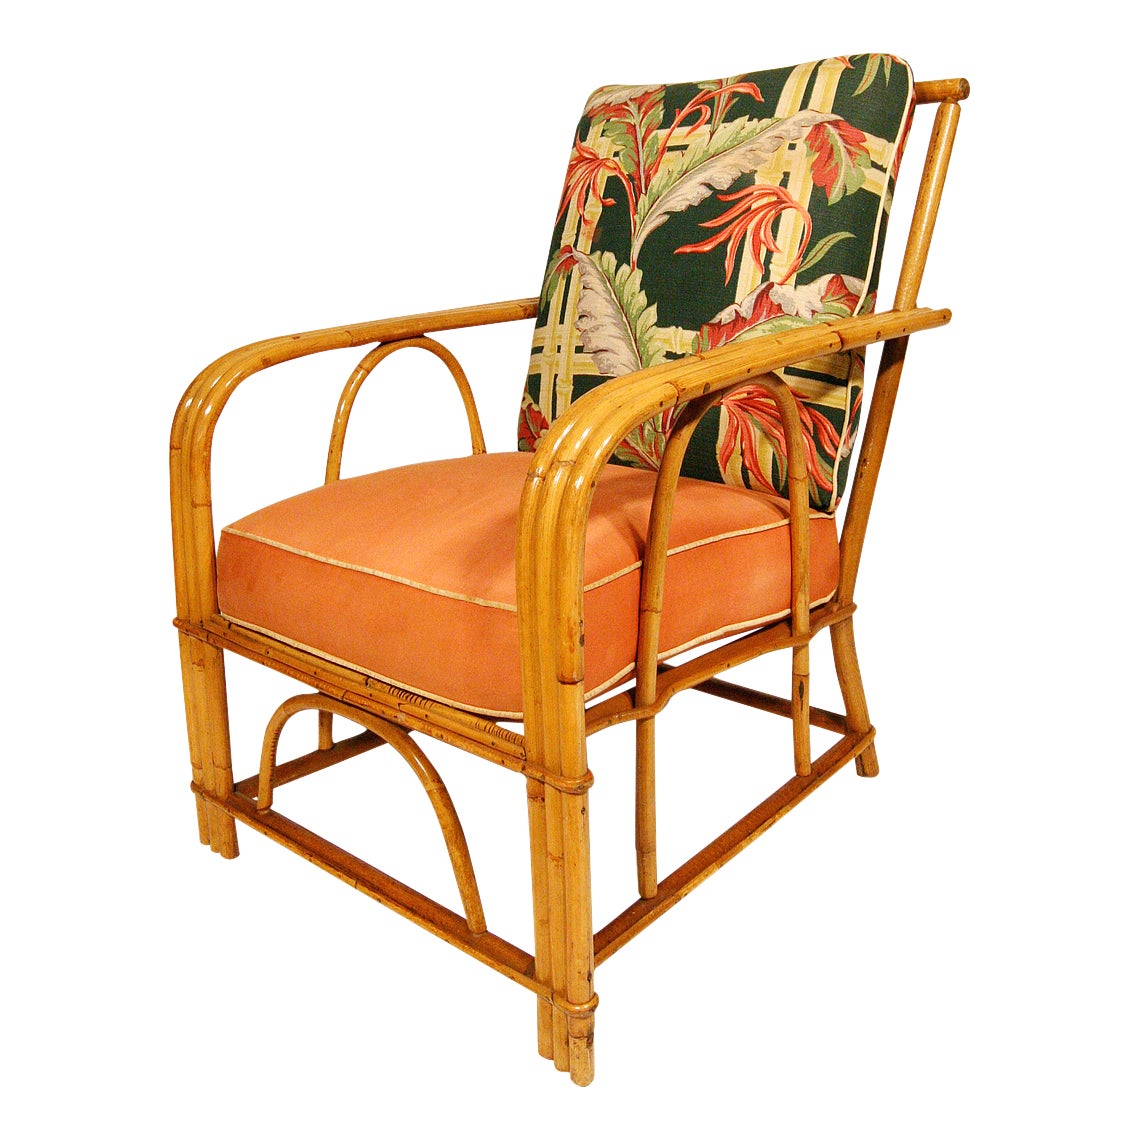 3 Strand Bentwood Rattan Armchair with Arching Sides